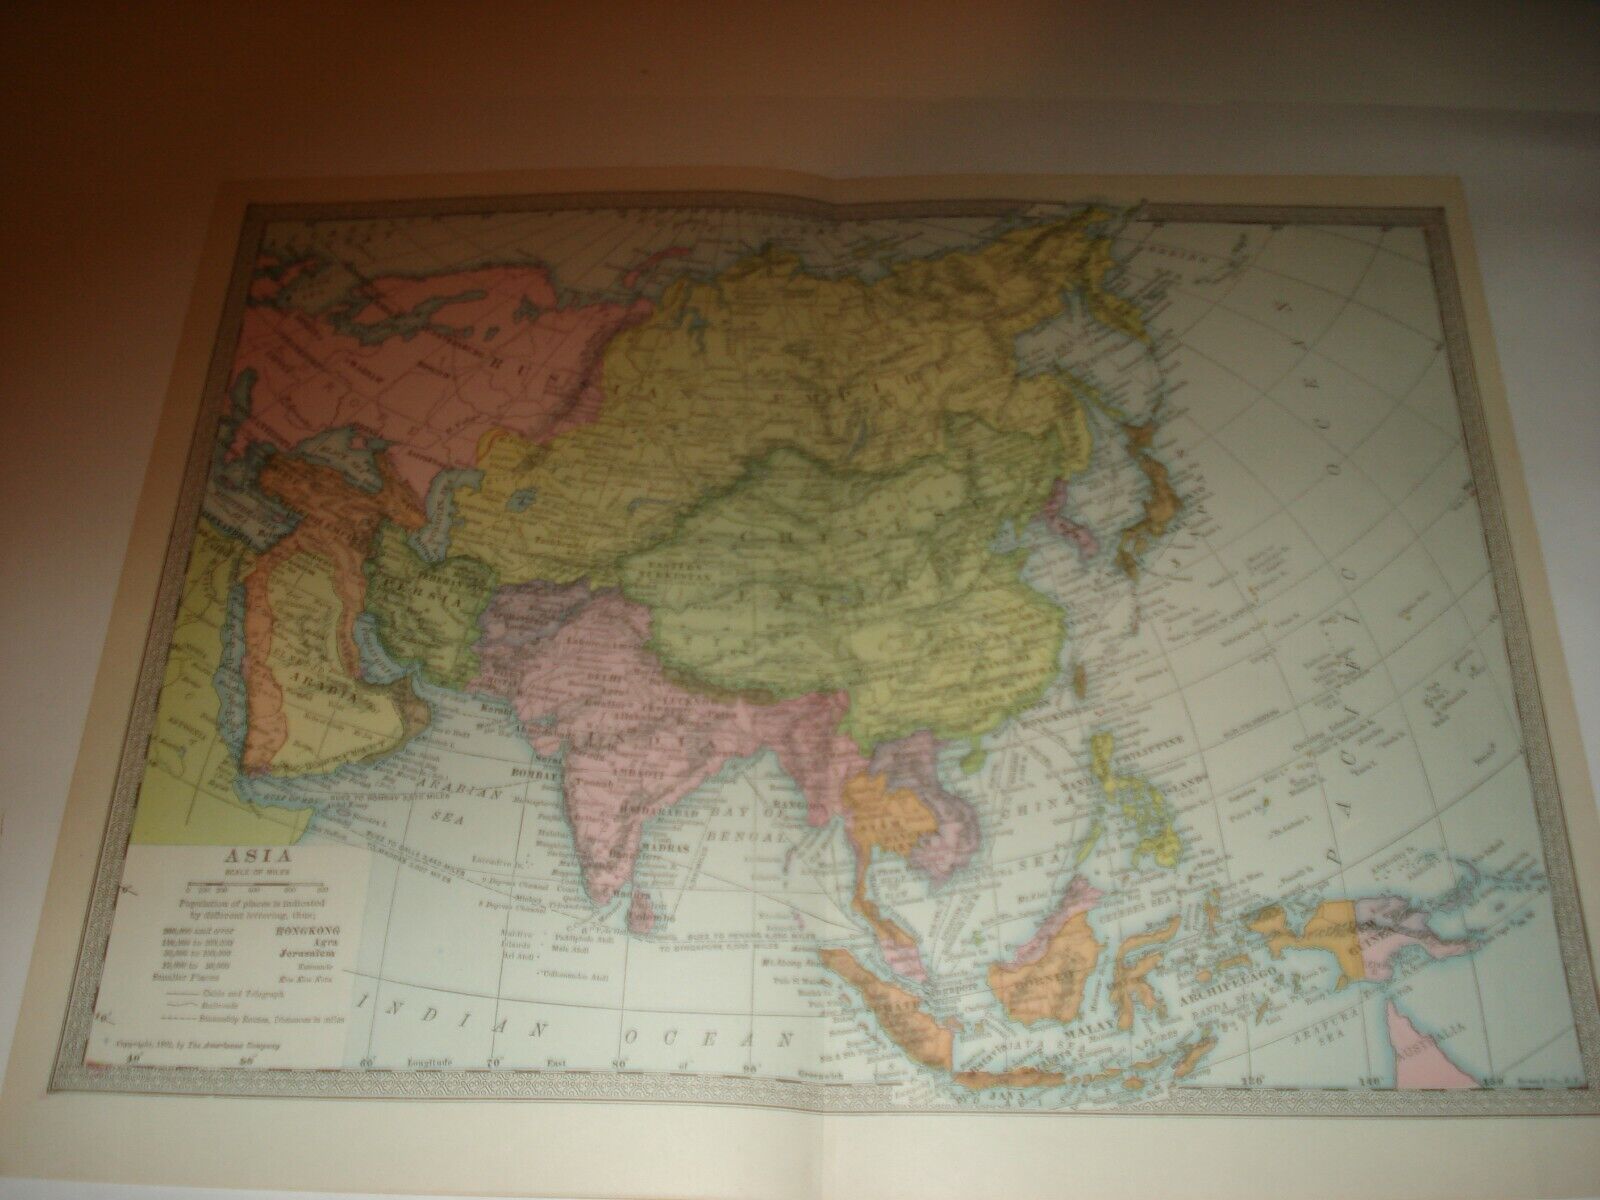 Lot of 5 Antique Maps 1903 1904  Asia Colorful Map Relief Rand McNally Без бренда - фотография #2